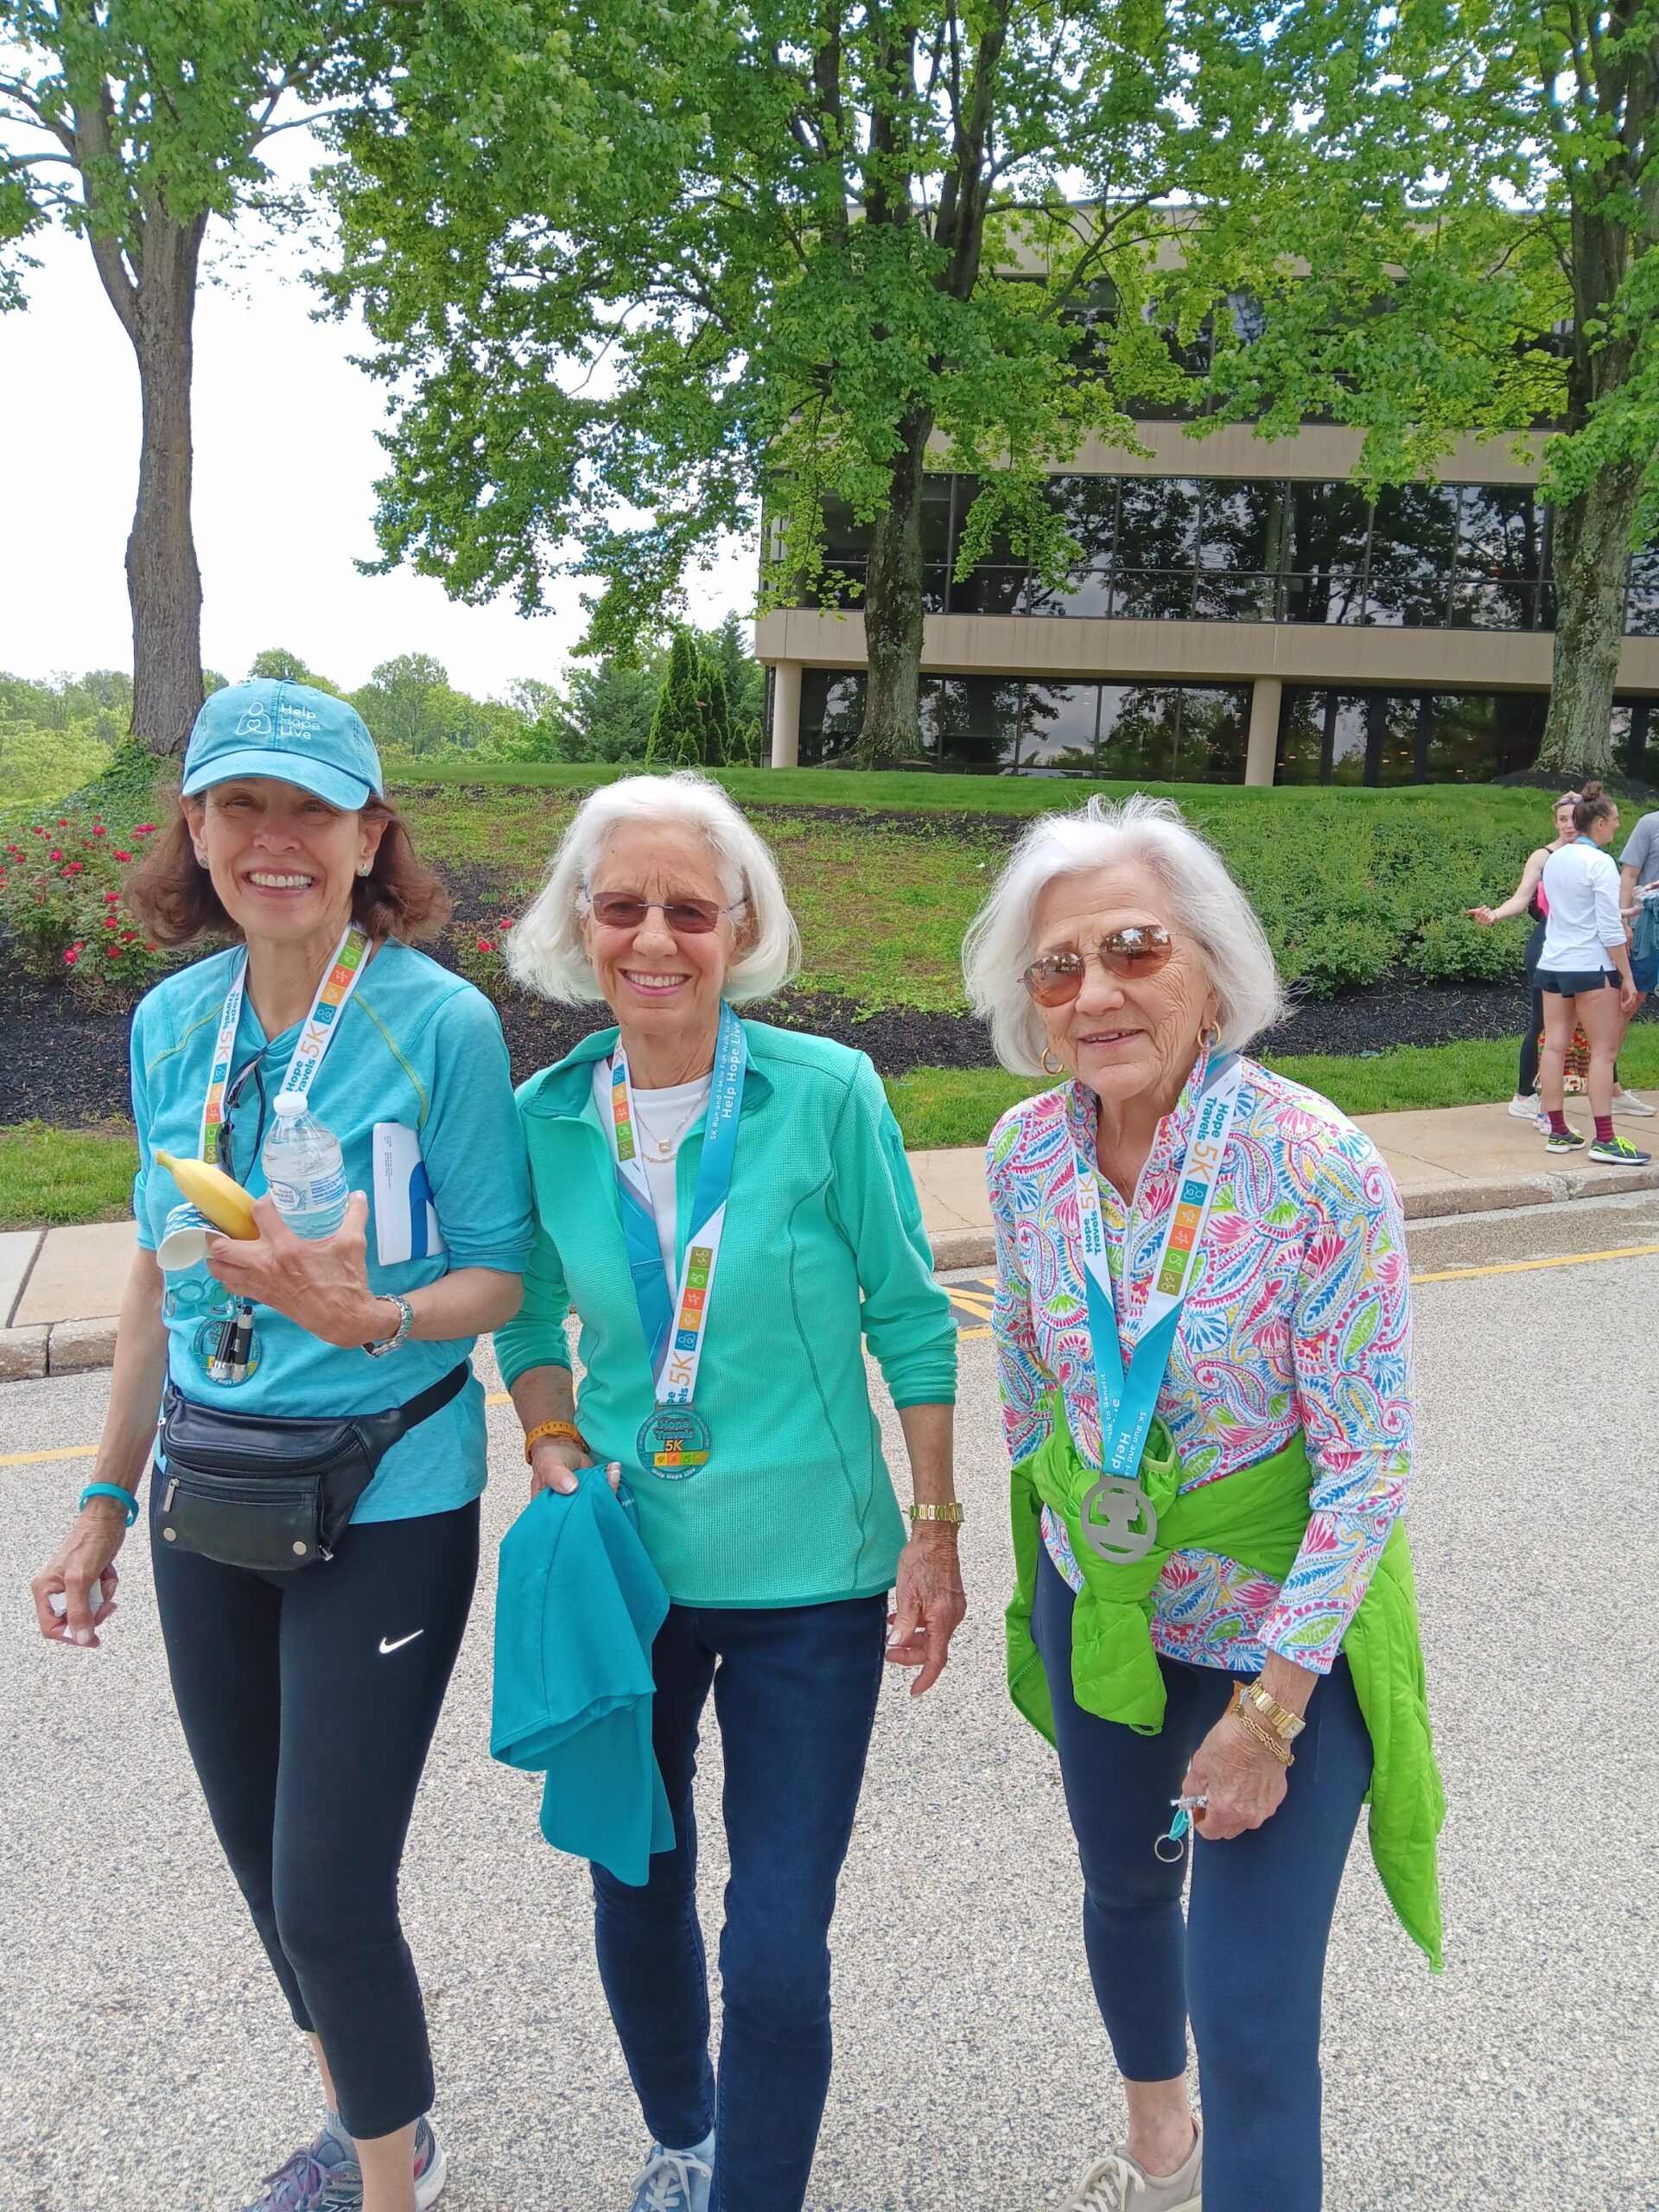 Three women pose for a photo during the Hope Travels 2024 event wearing athletic gear and their Hope Travels 5K medals around their necks. The first and third women are Help Hope Live legacy supporter Chris Kanter and co-founder Pat Kolff. Chris has light skin, shoulder-length brown hair, and a teal Help Hope Live cap. Pat has light skin, shoulder-length white hair, hoop earrings, and brown sunglasses.